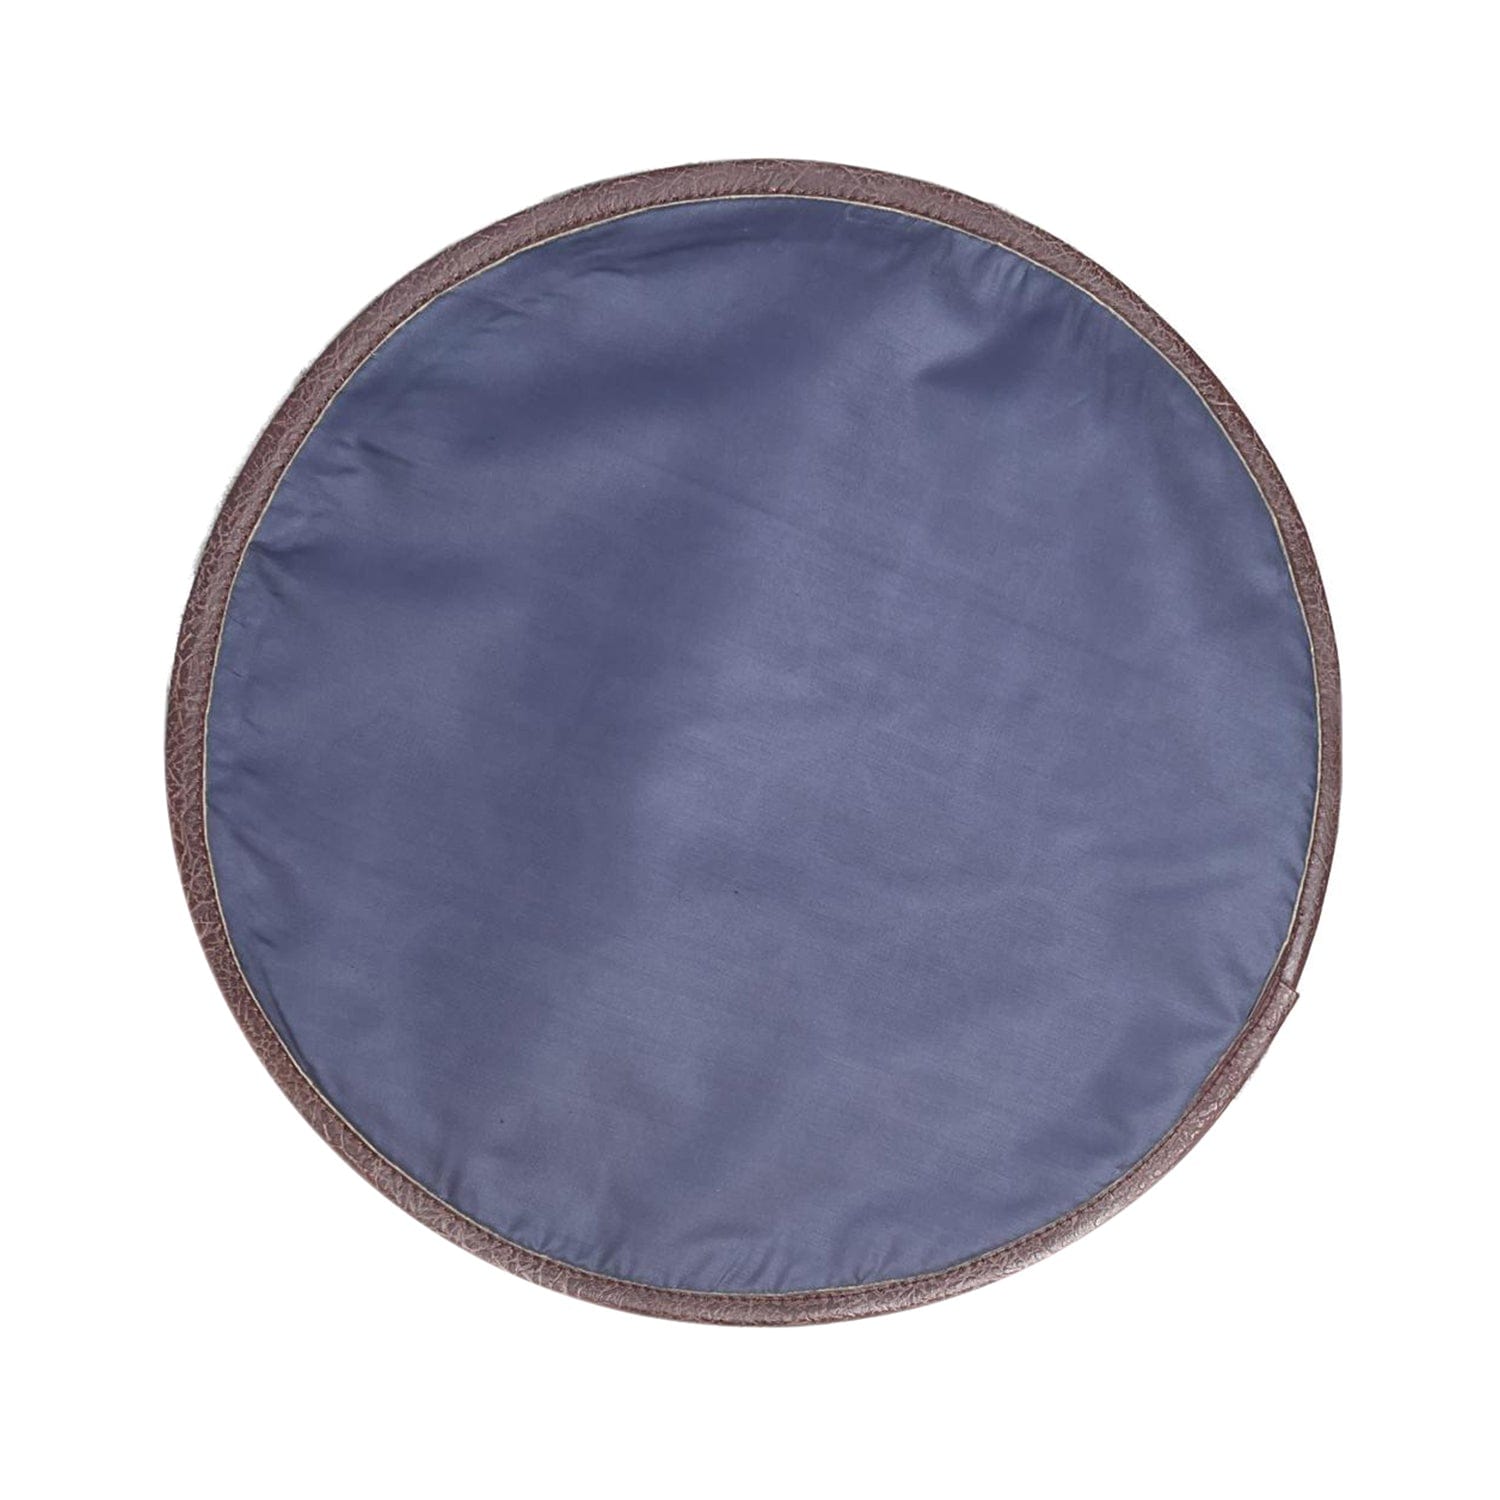 Mona B Set of 2 Printed Mosaic Placemats, 13 INCH Round, Best for Bed-Side Table/Center Table, Dining Table/Shelves (Medallion) - Placemat by Mona-B - Backpack, Flat30, New Arrivals, Sale, Shop1999, Shop2999, Shop3999